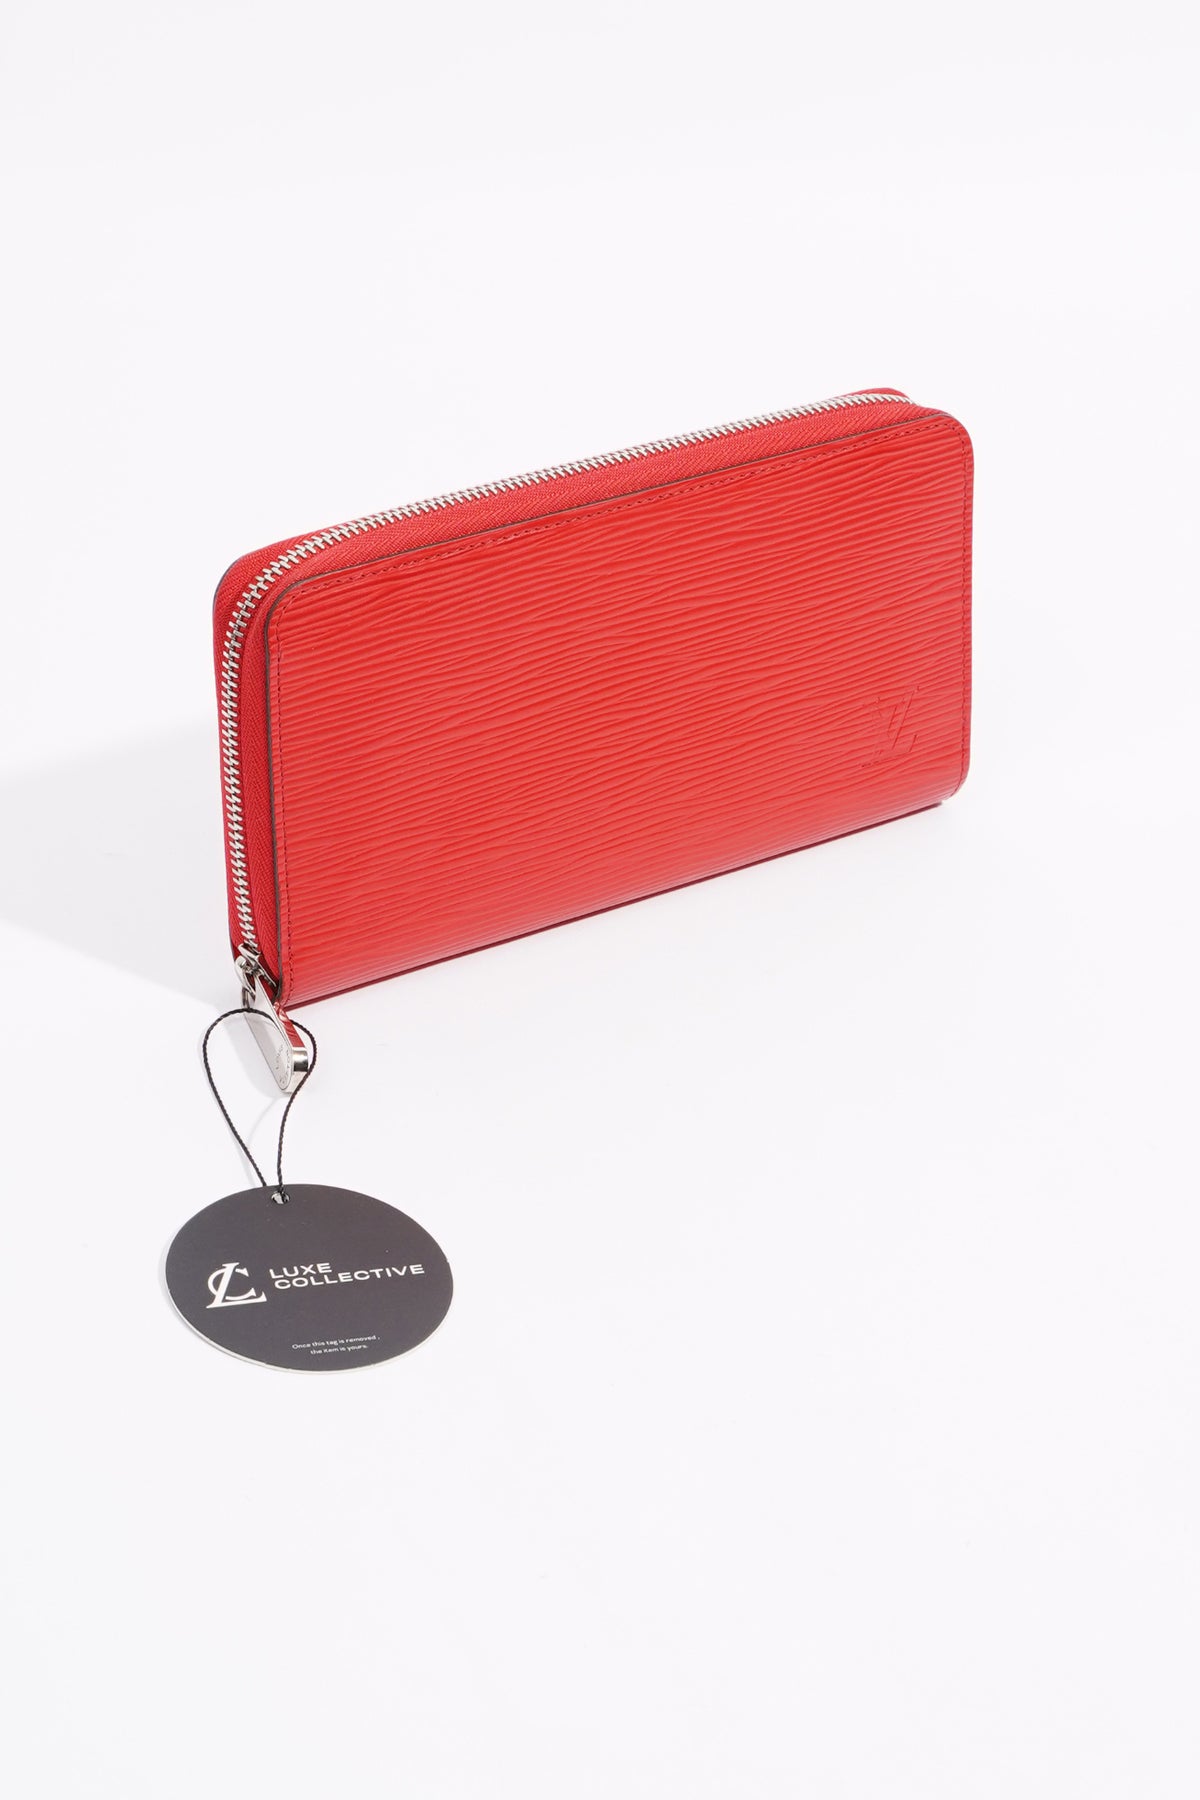 Louis Vuitton Womens Zippy Wallet Red Epi Leather – Luxe Collective